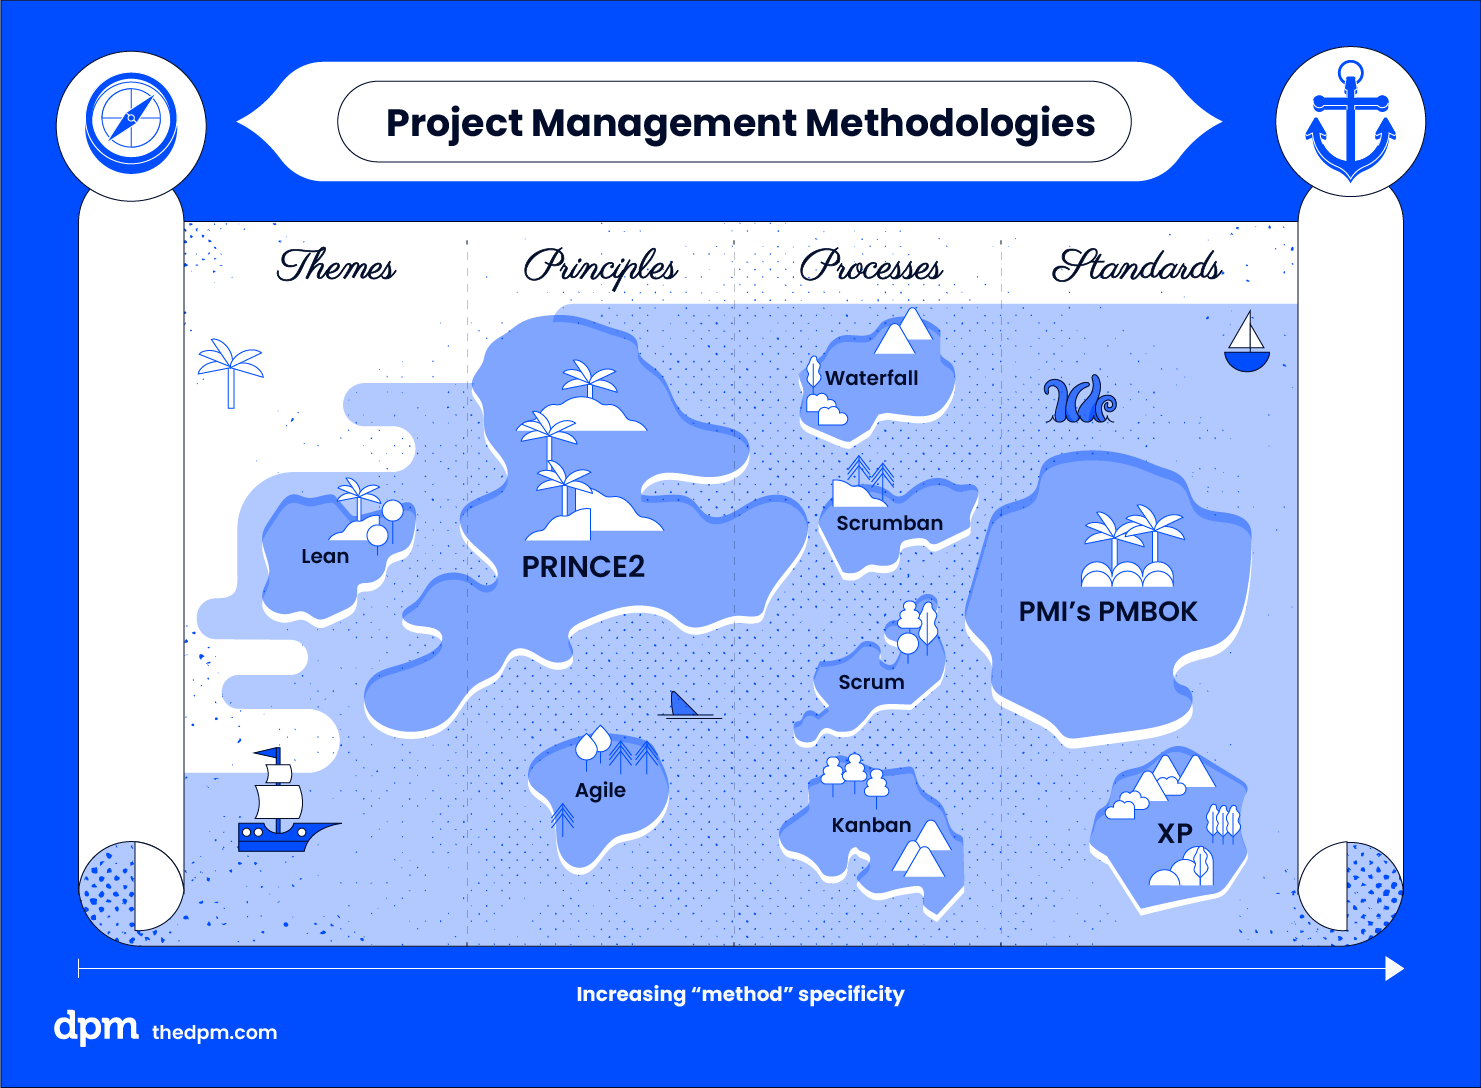 pirate map showing the different project management methodologies and where they fall in terms of defining themes, principles, processes, and standards